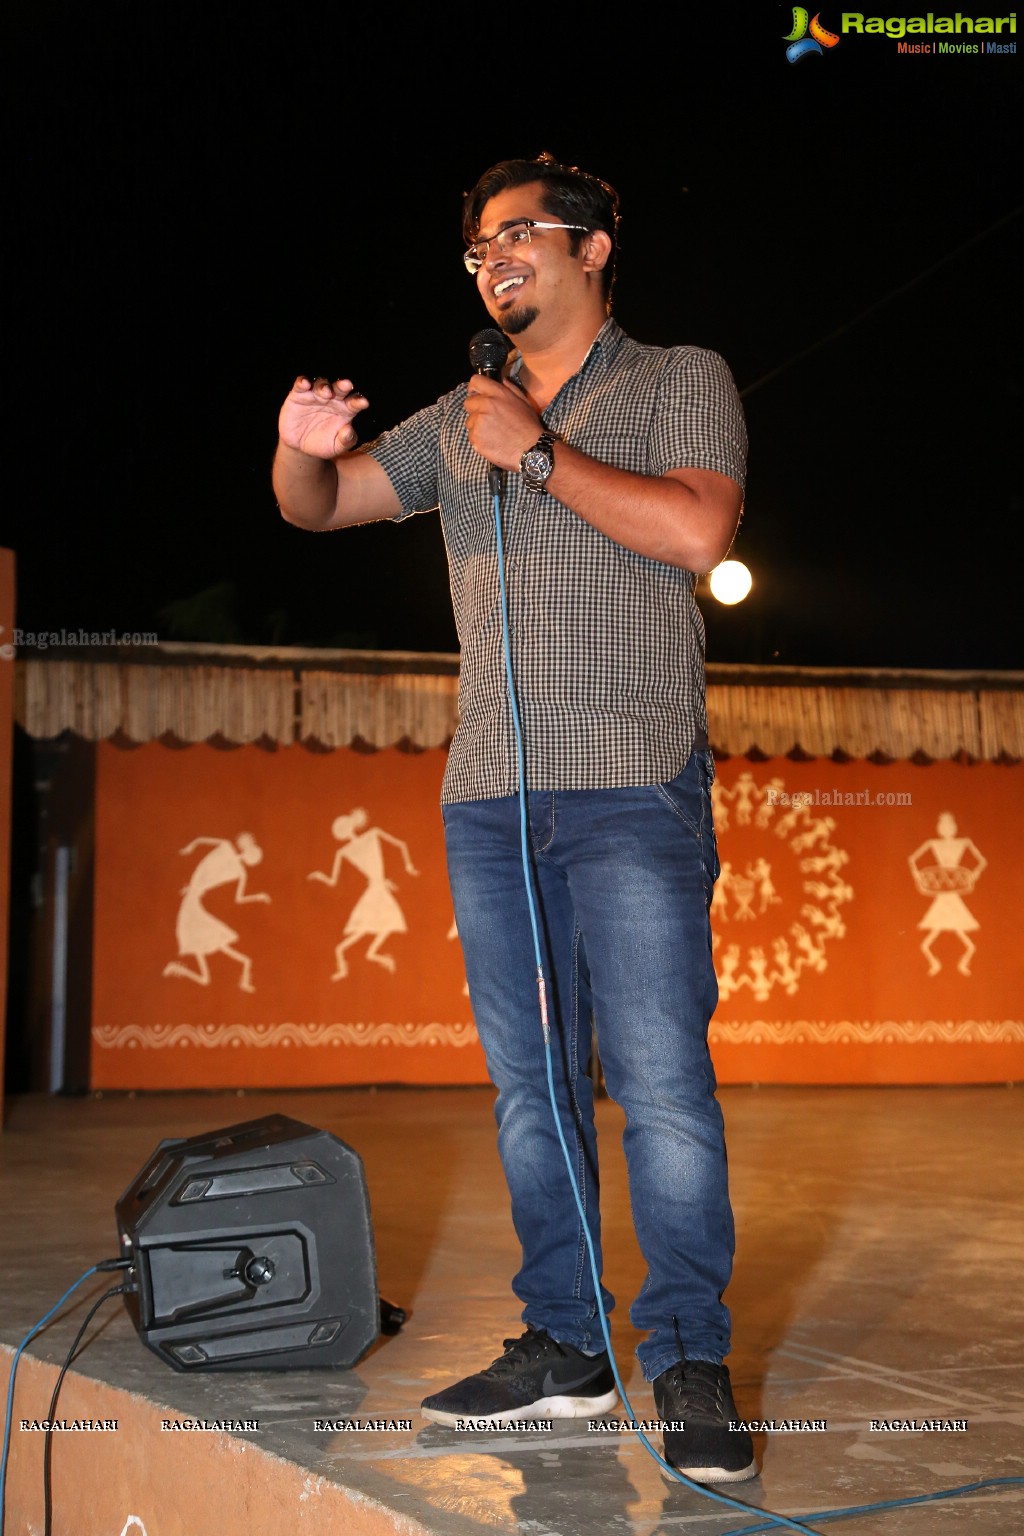 Stand-up Comedy by Hriday Ranjan & Sandesh Johnny at Phoenix Arena